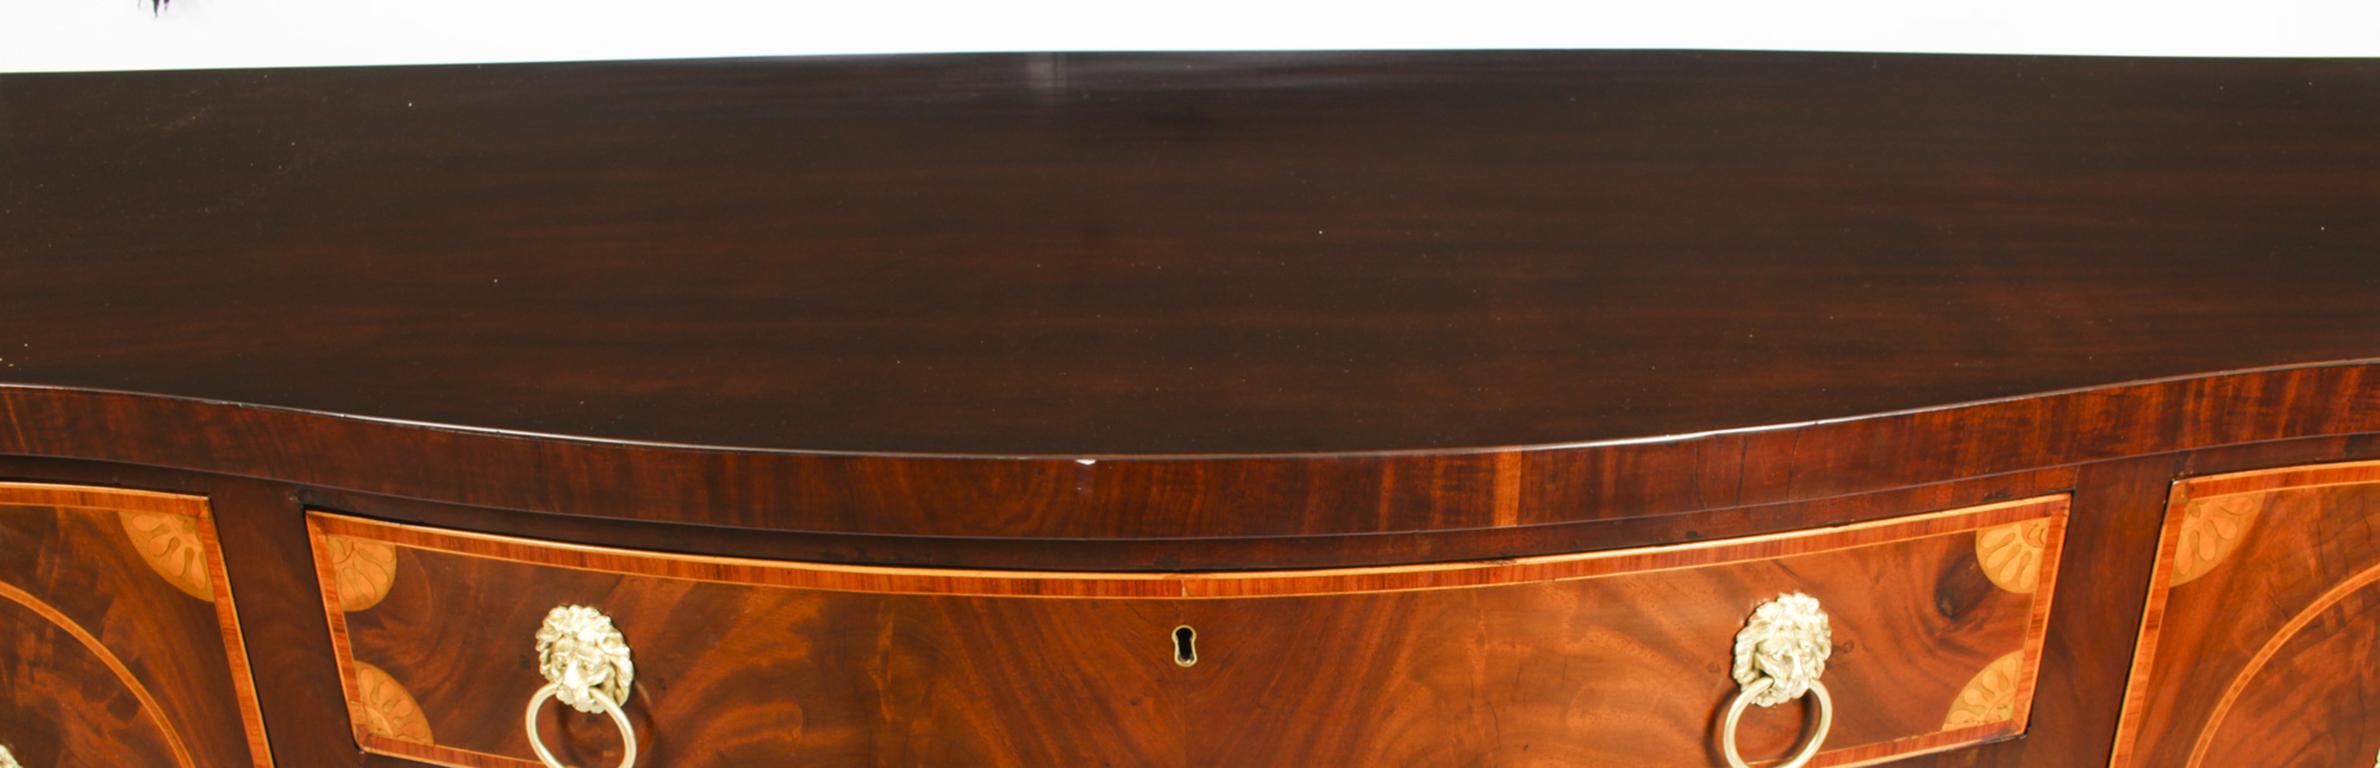 Antique George III Flame Mahogany Serpentine Sideboard, 18th Century For Sale 10